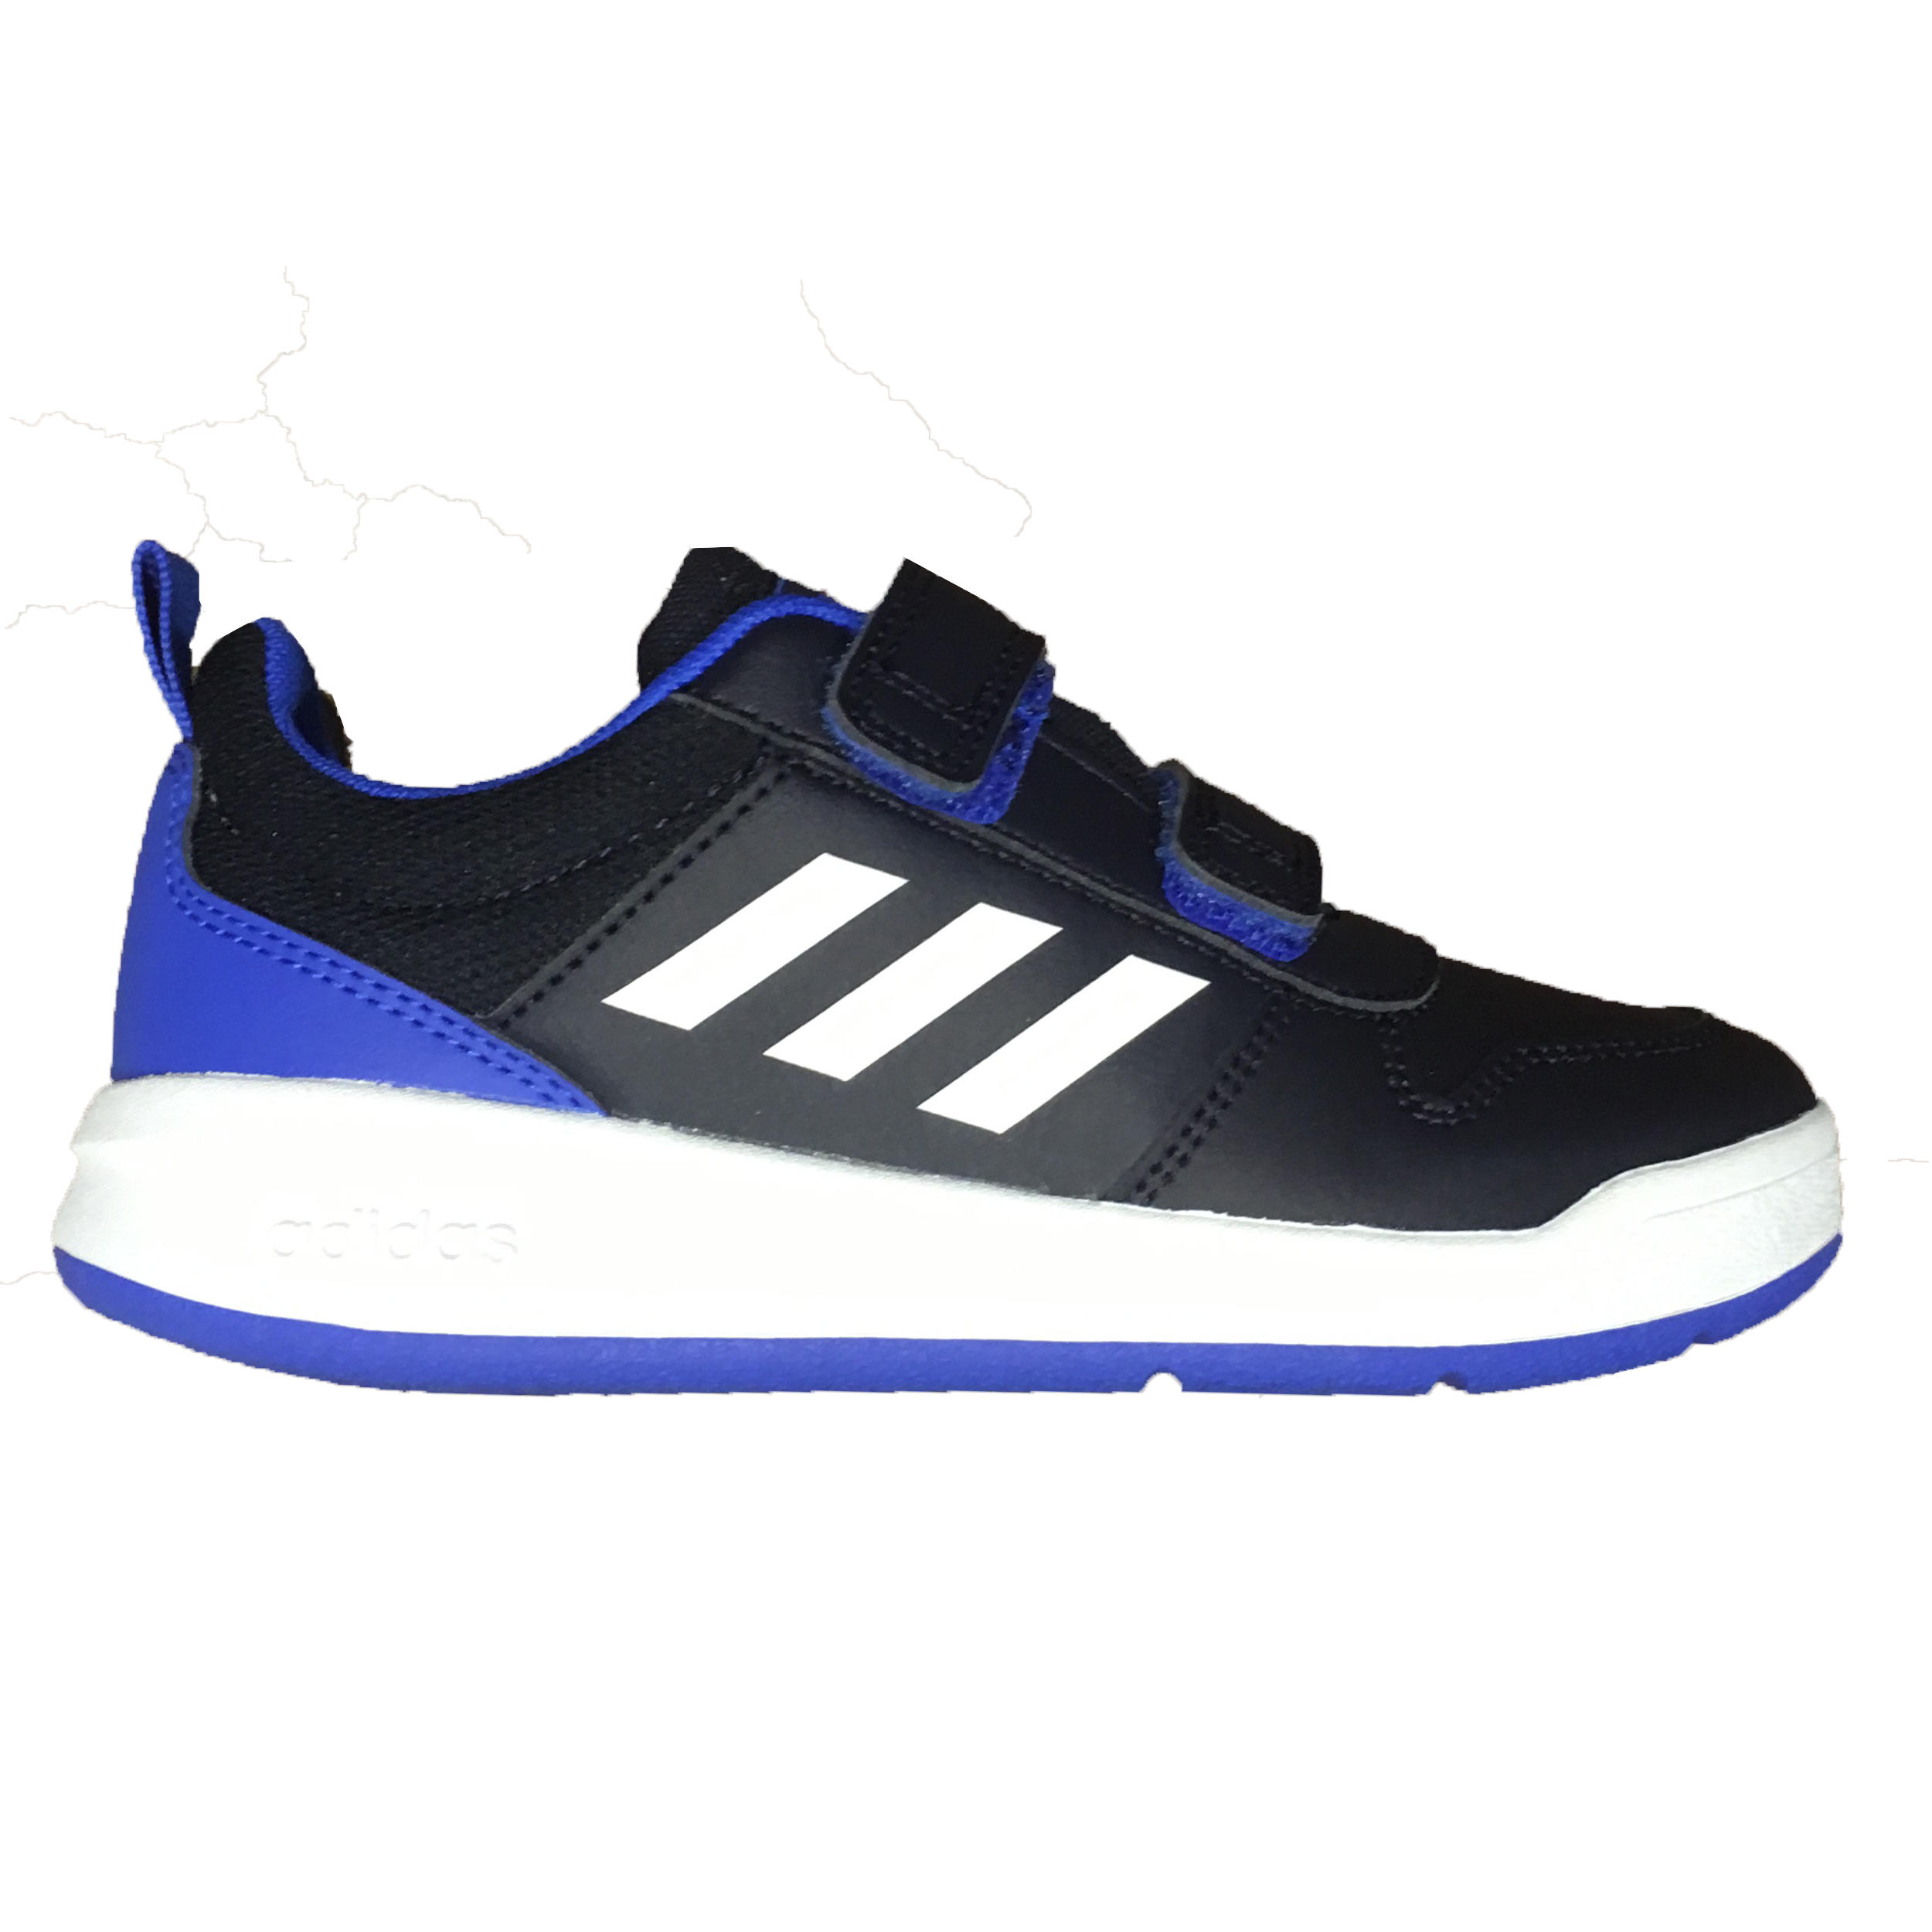 chaussure fille 26 adidas